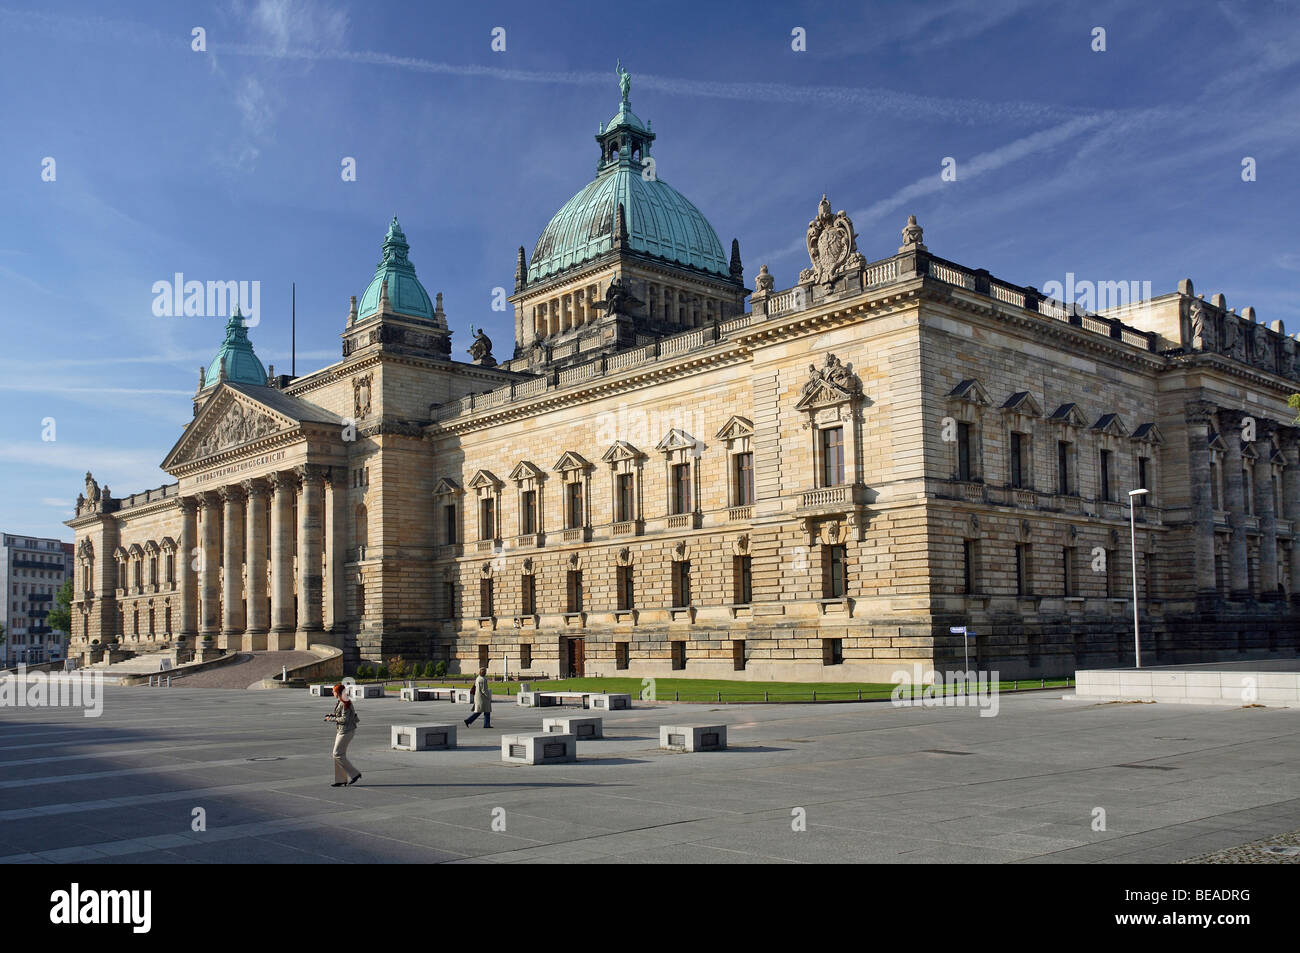 The building of the Federal Administrative Court, Leipzig, Germany Stock Photo